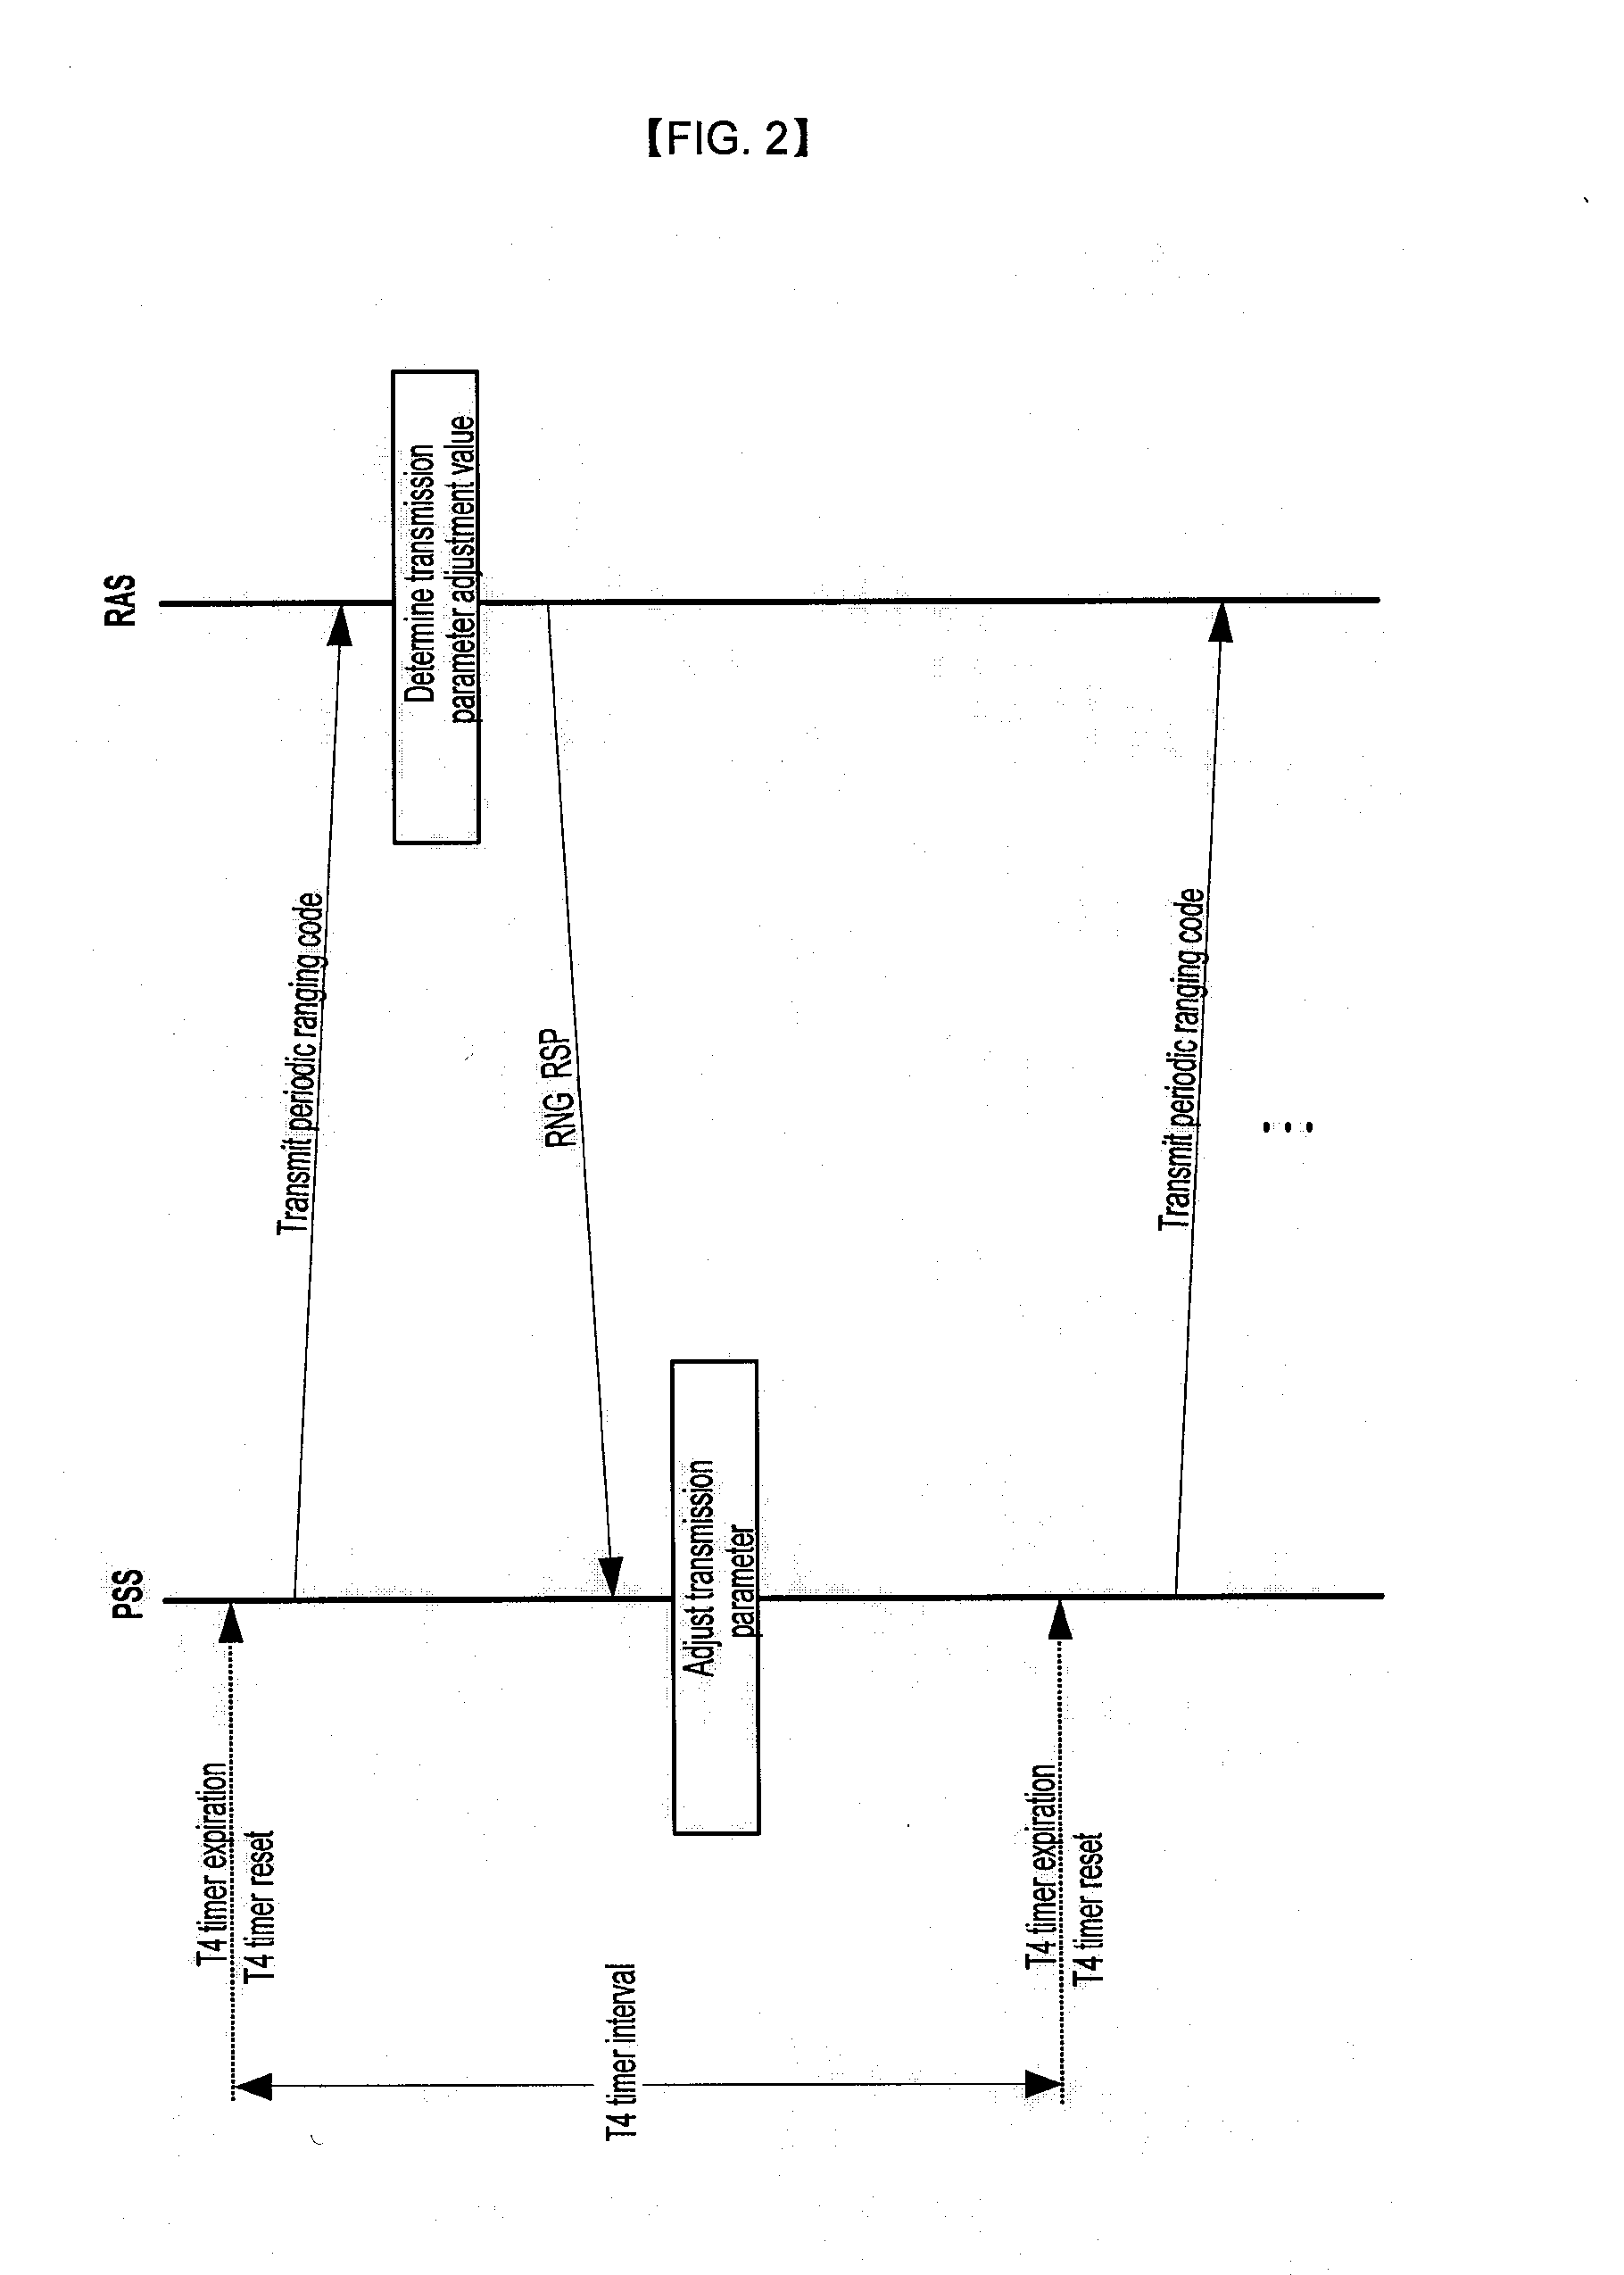 Method for Ranging with Bandwidth Request Code